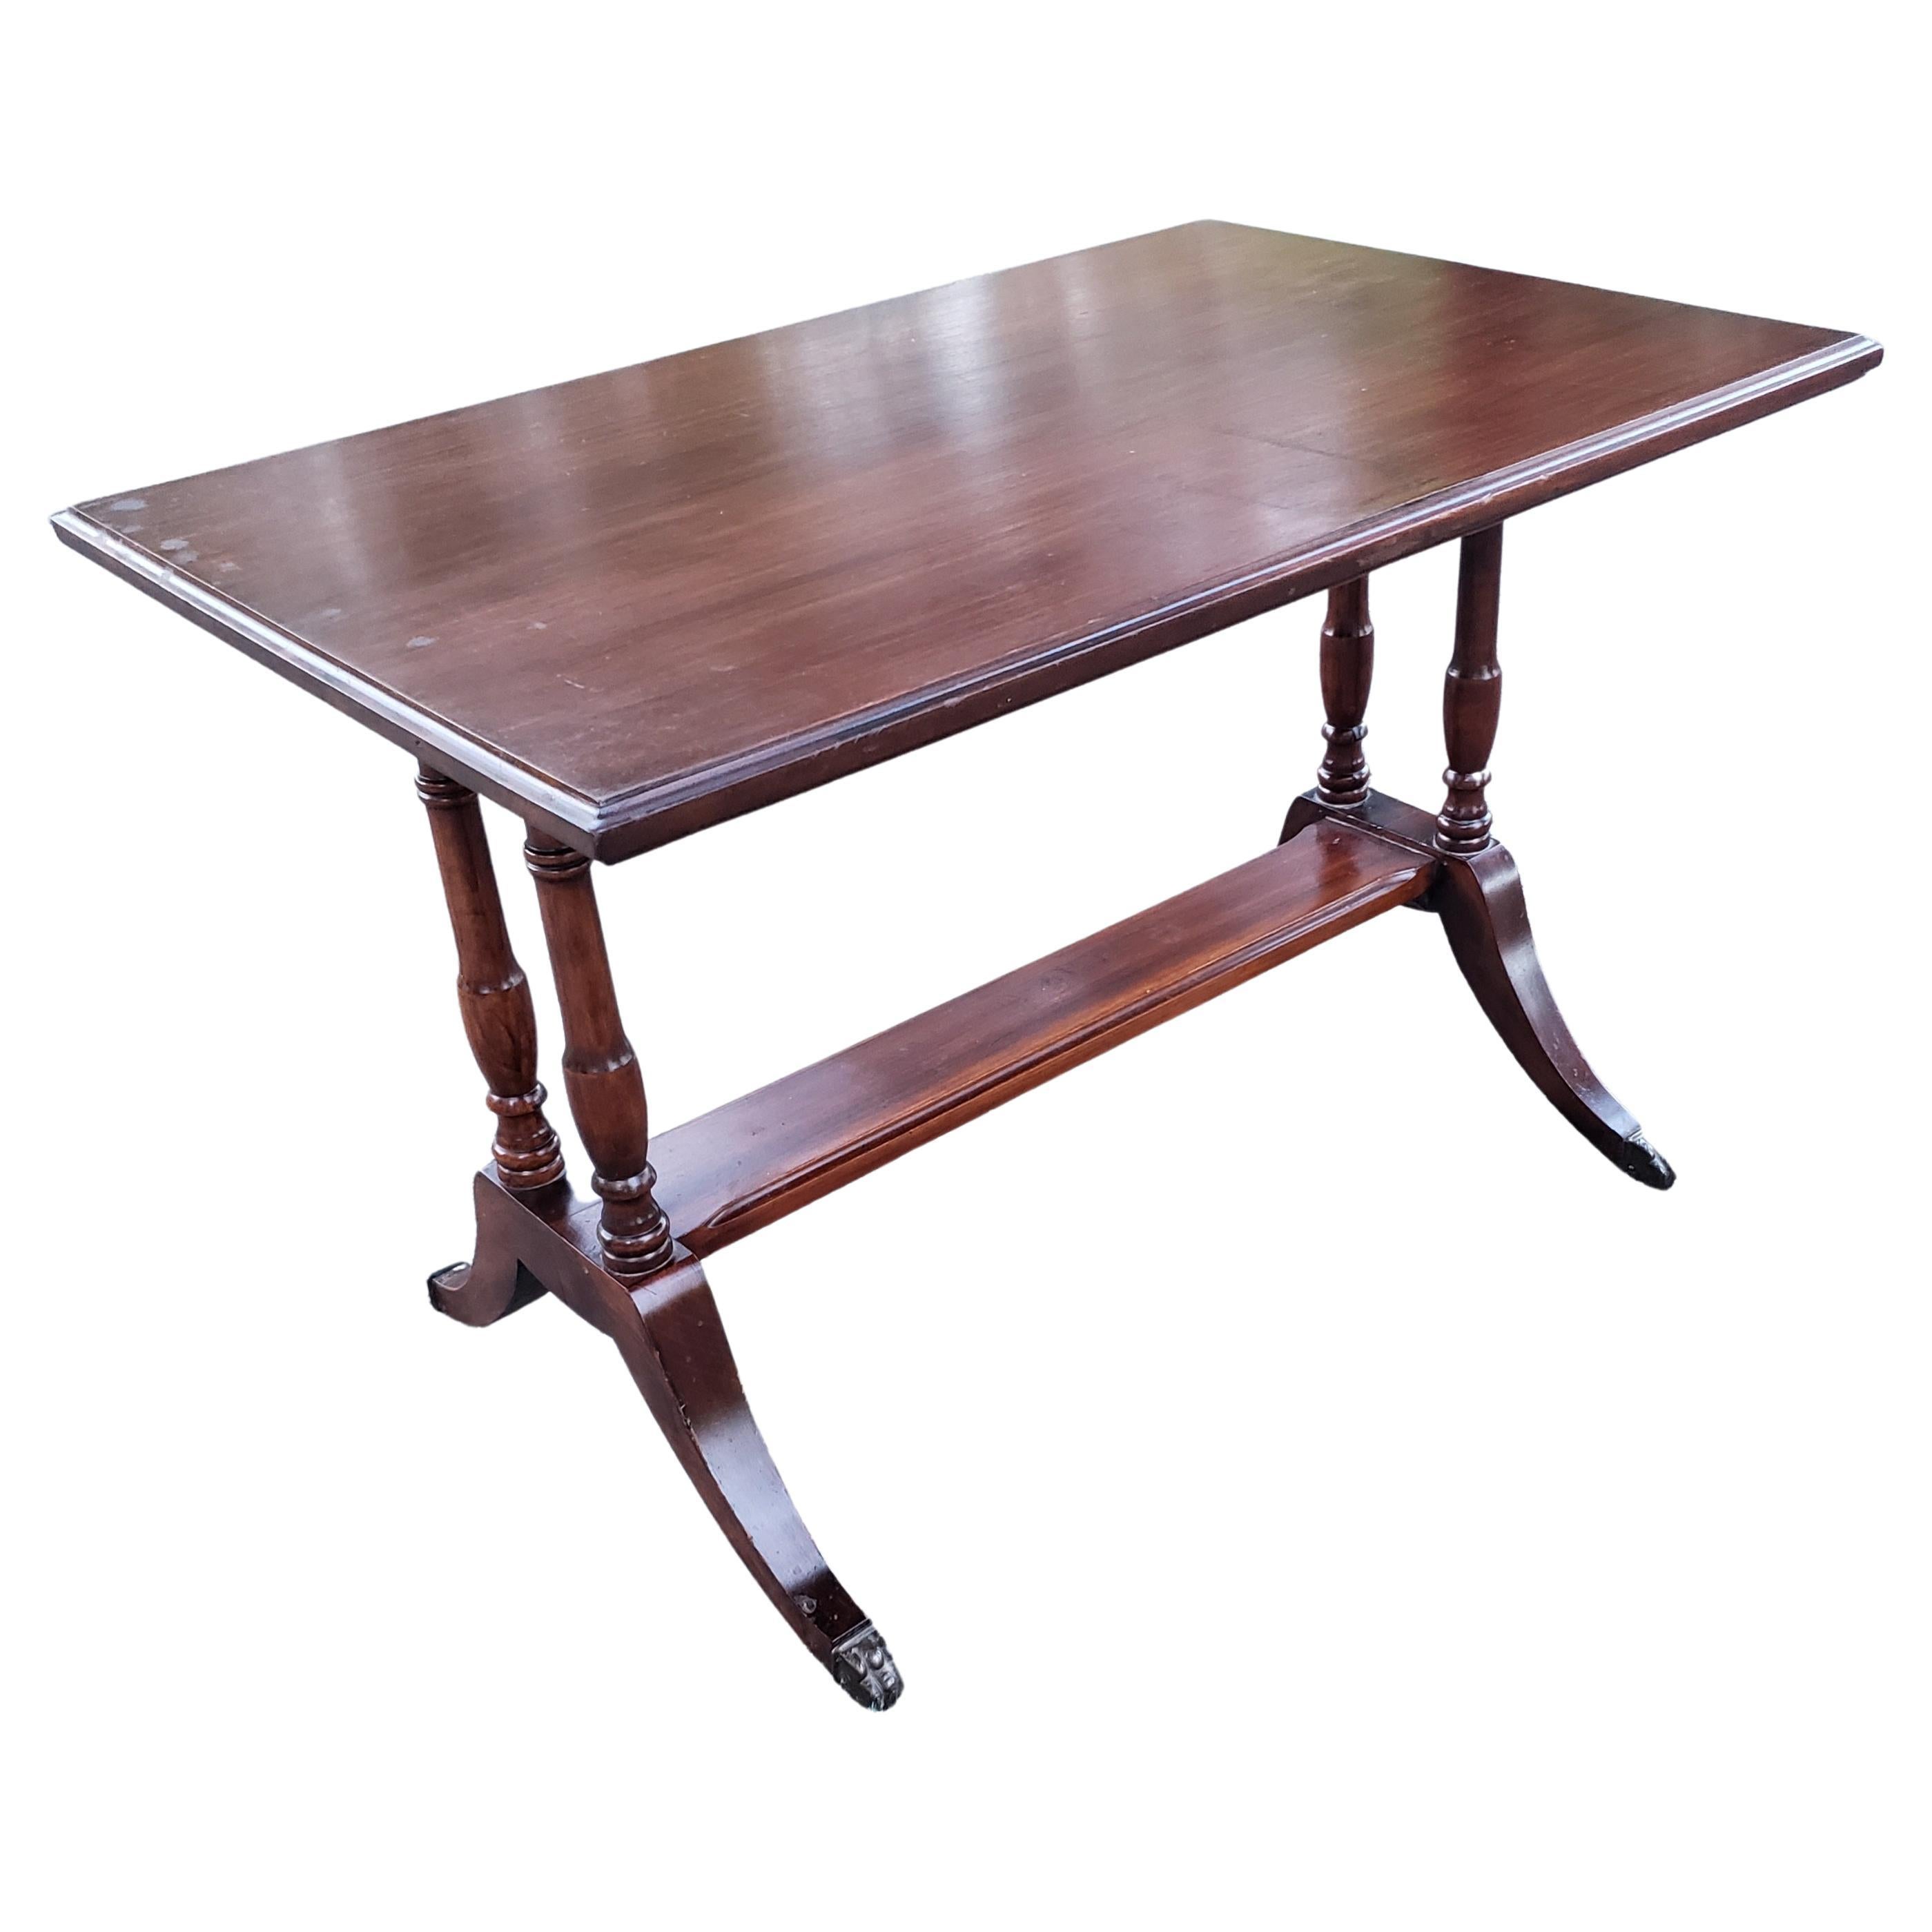 American Colonial Vintage Small Space American Mahogany Tea / Coffee Table, circa 1930s For Sale